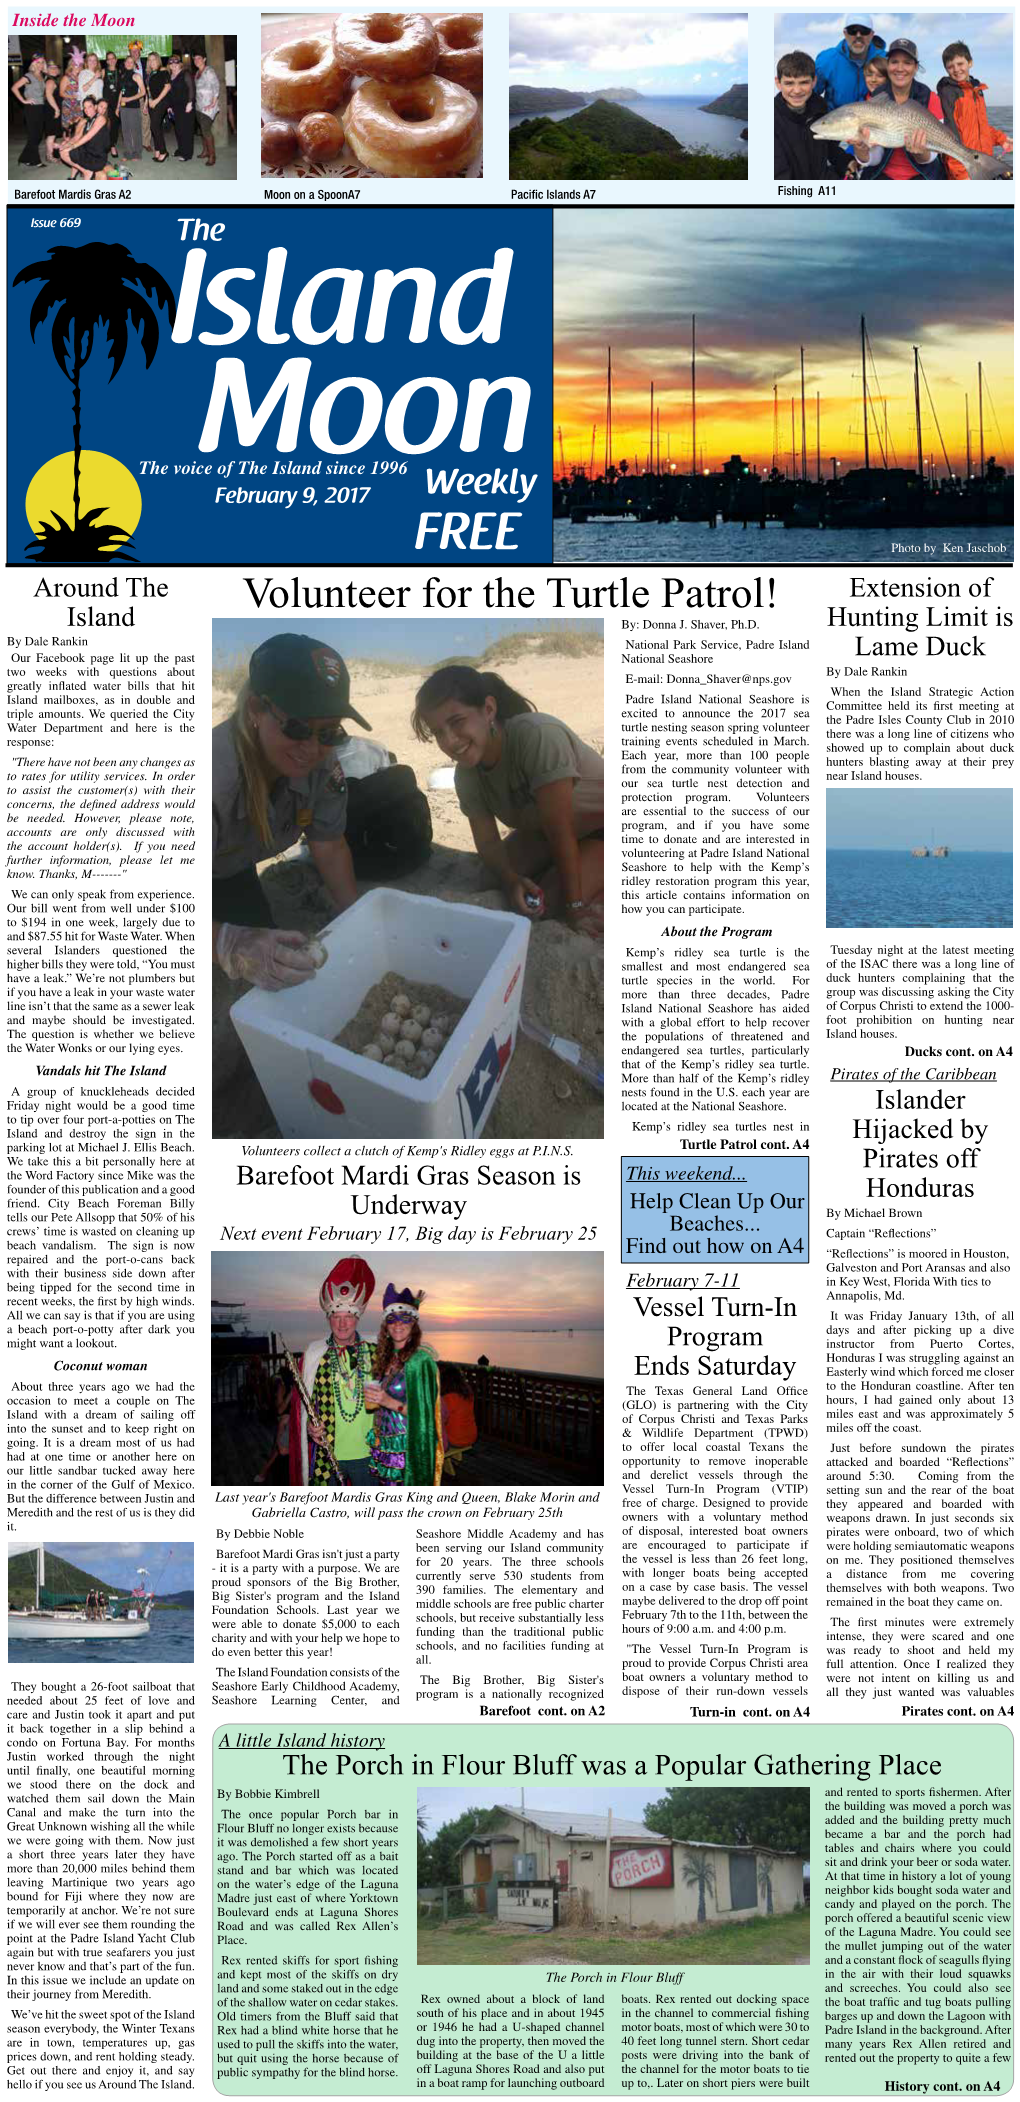 Volunteer for the Turtle Patrol! Extension of Island By: Donna J